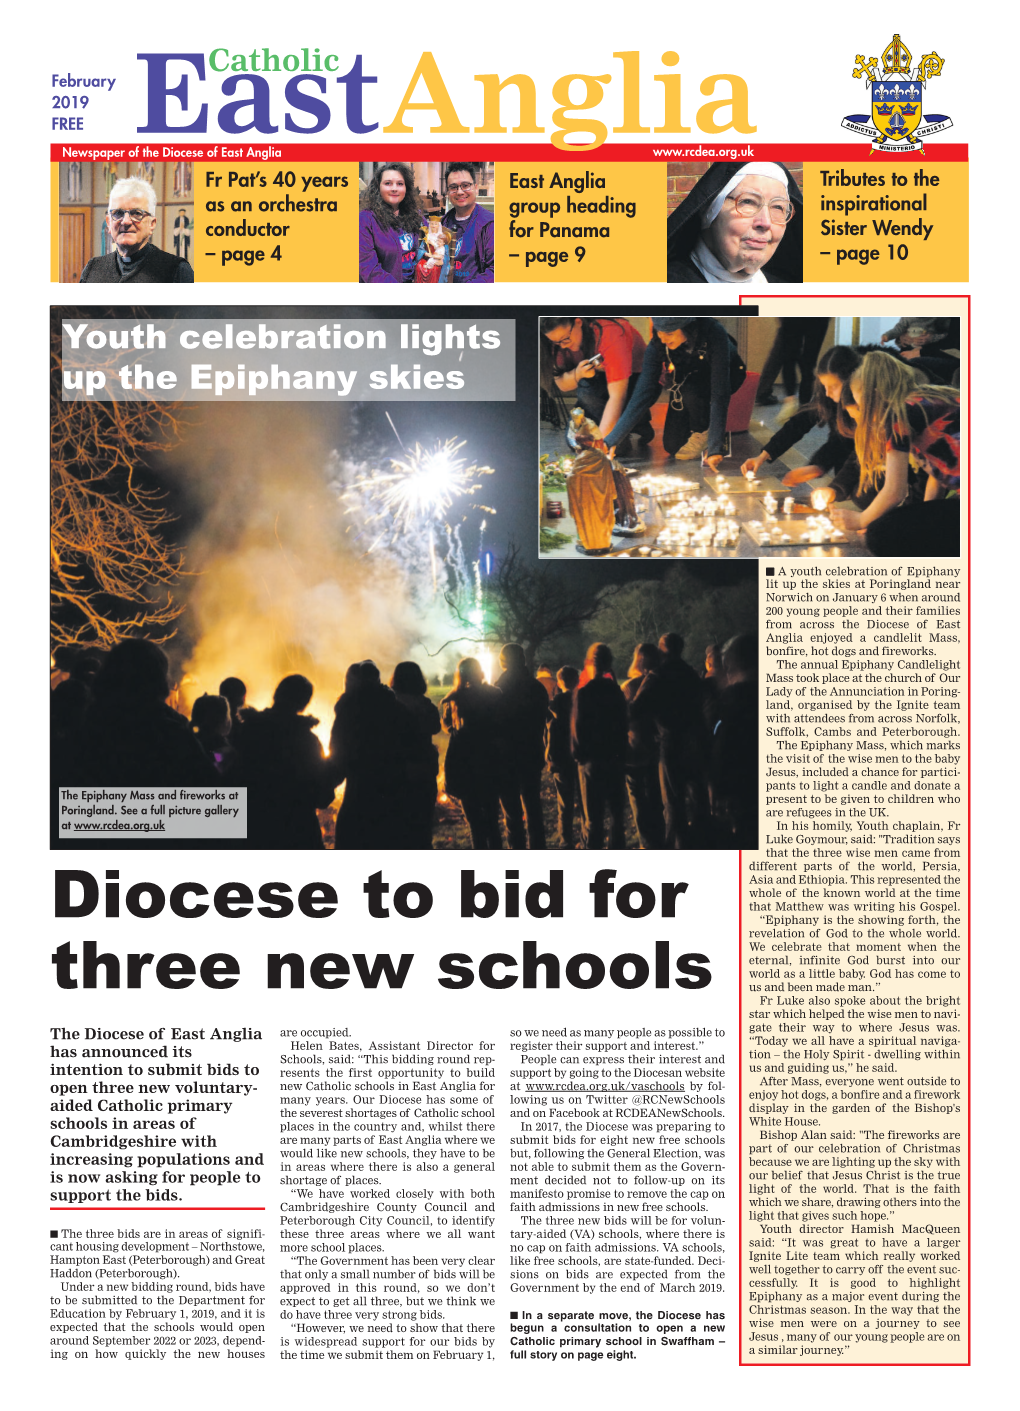 To Read the February 2019 Edition of Catholic